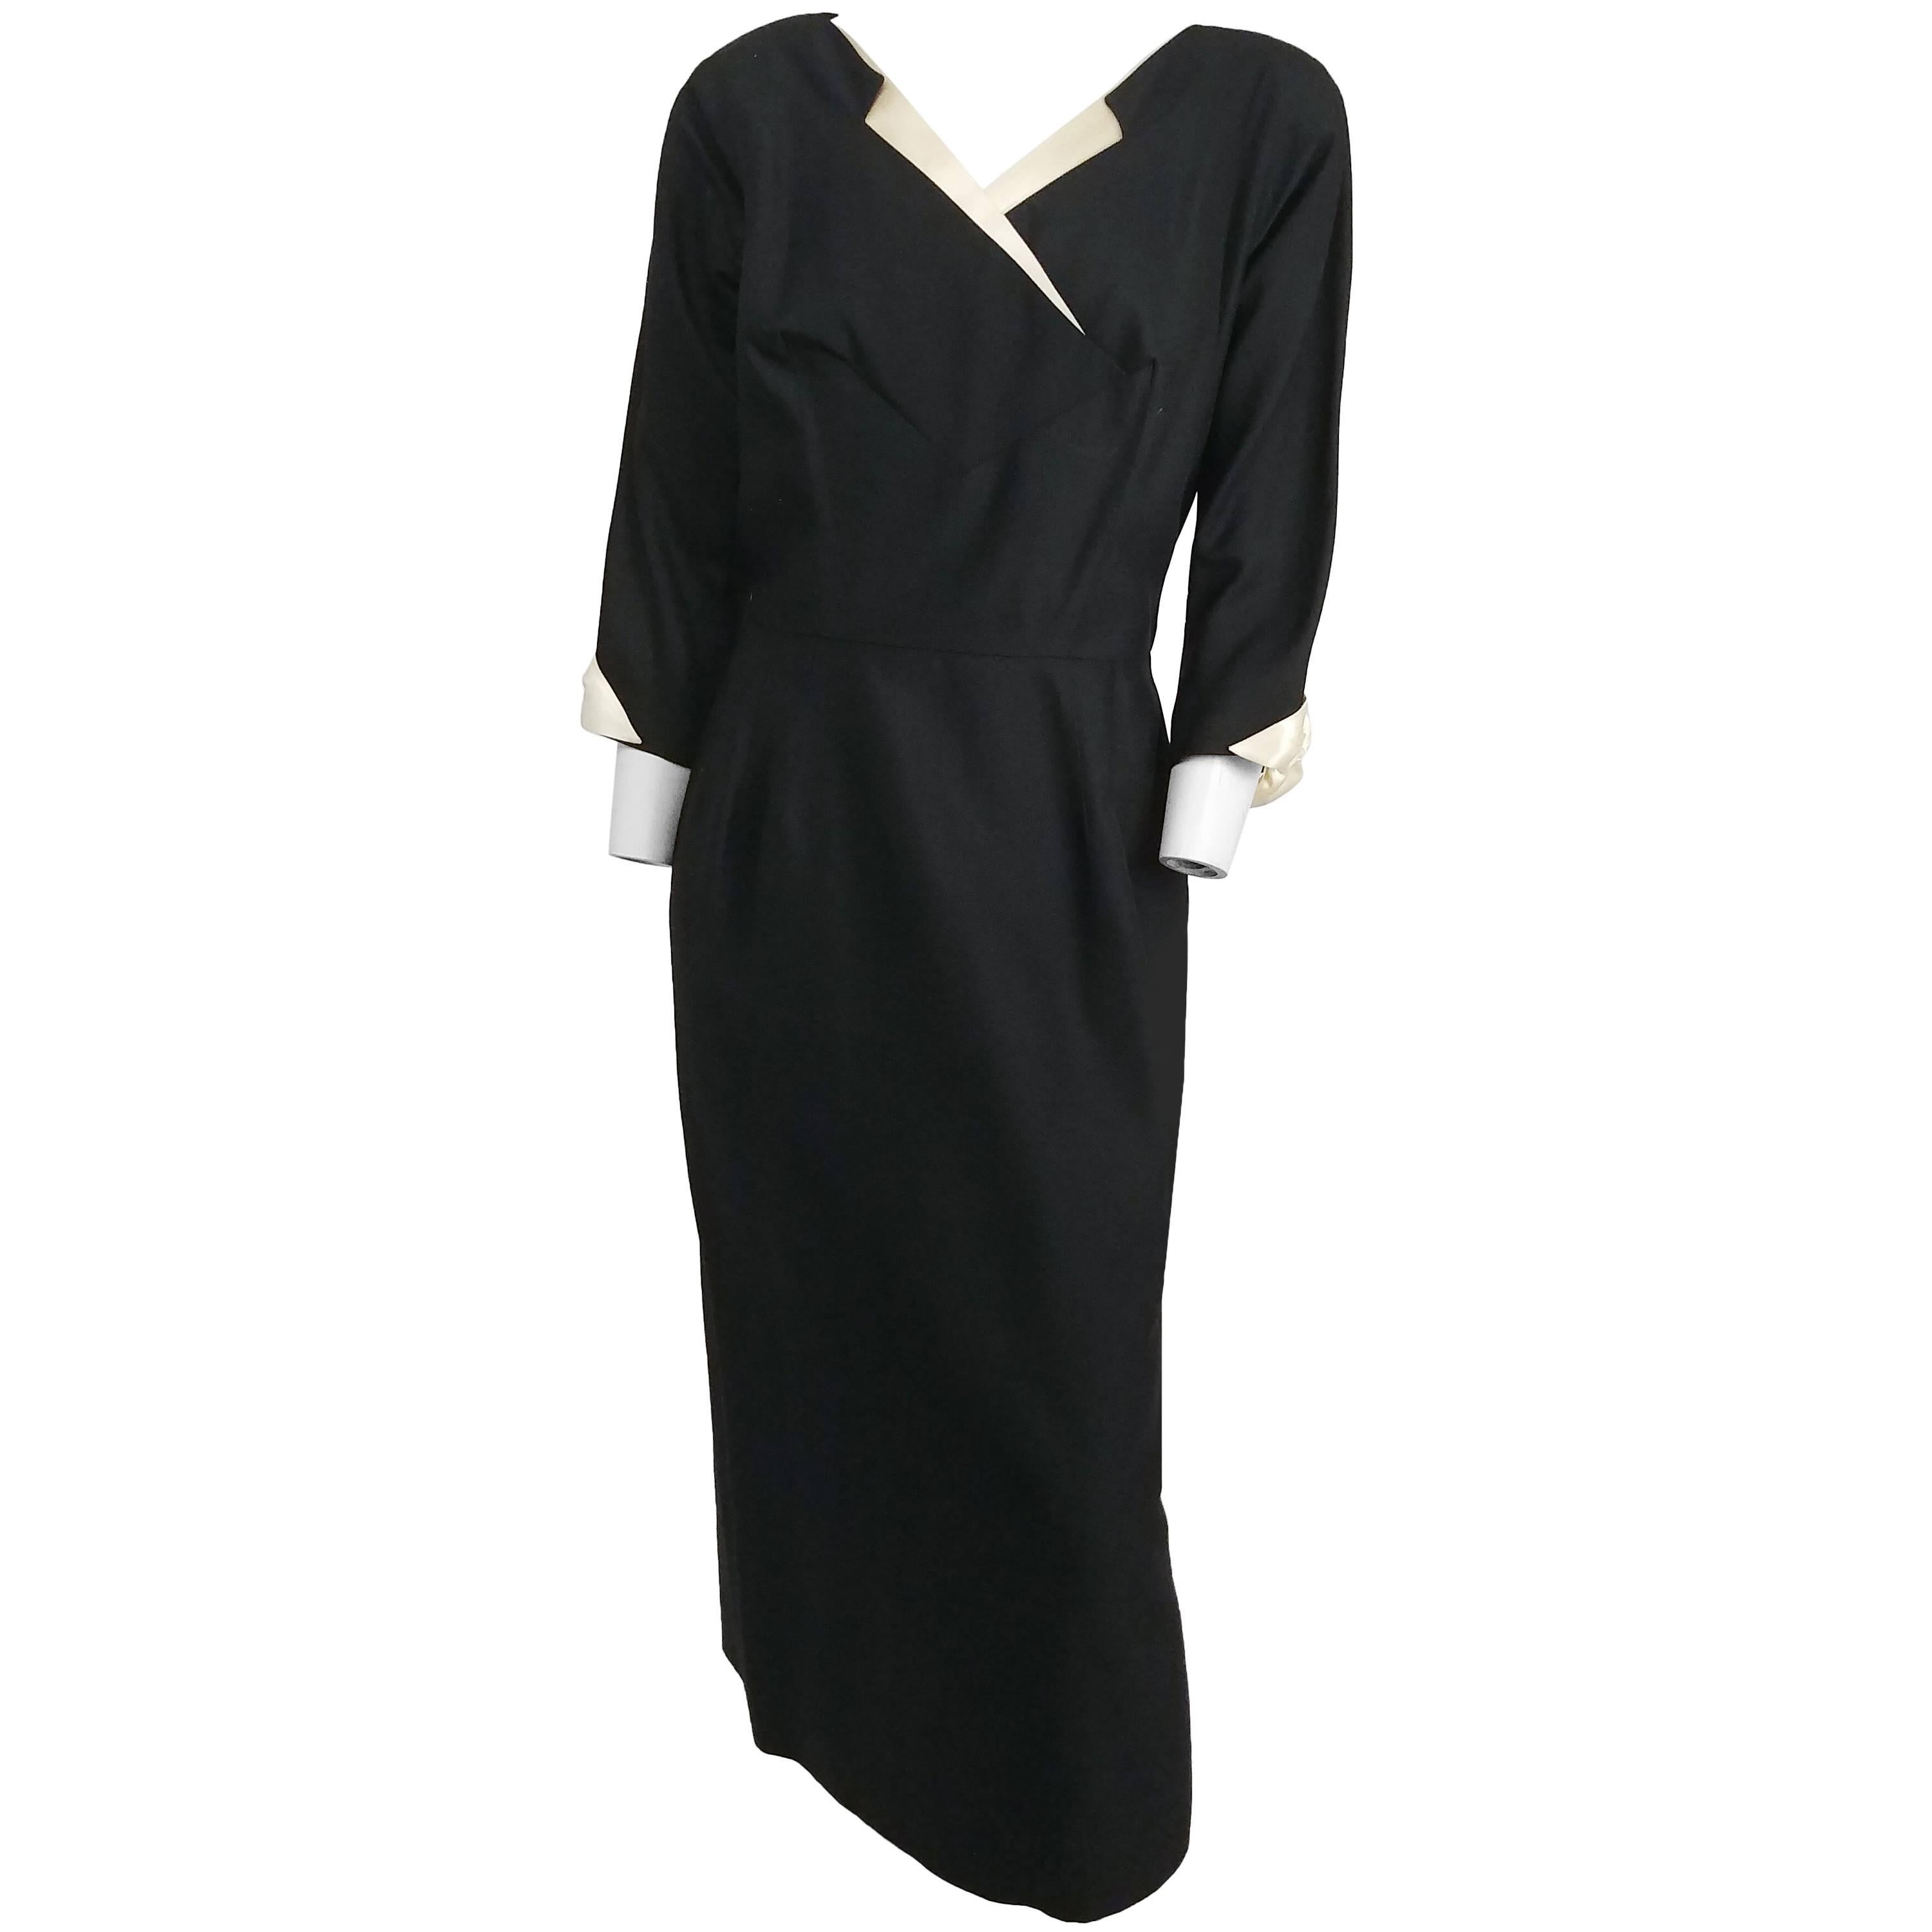 1950s Black Dress with White Accents For Sale